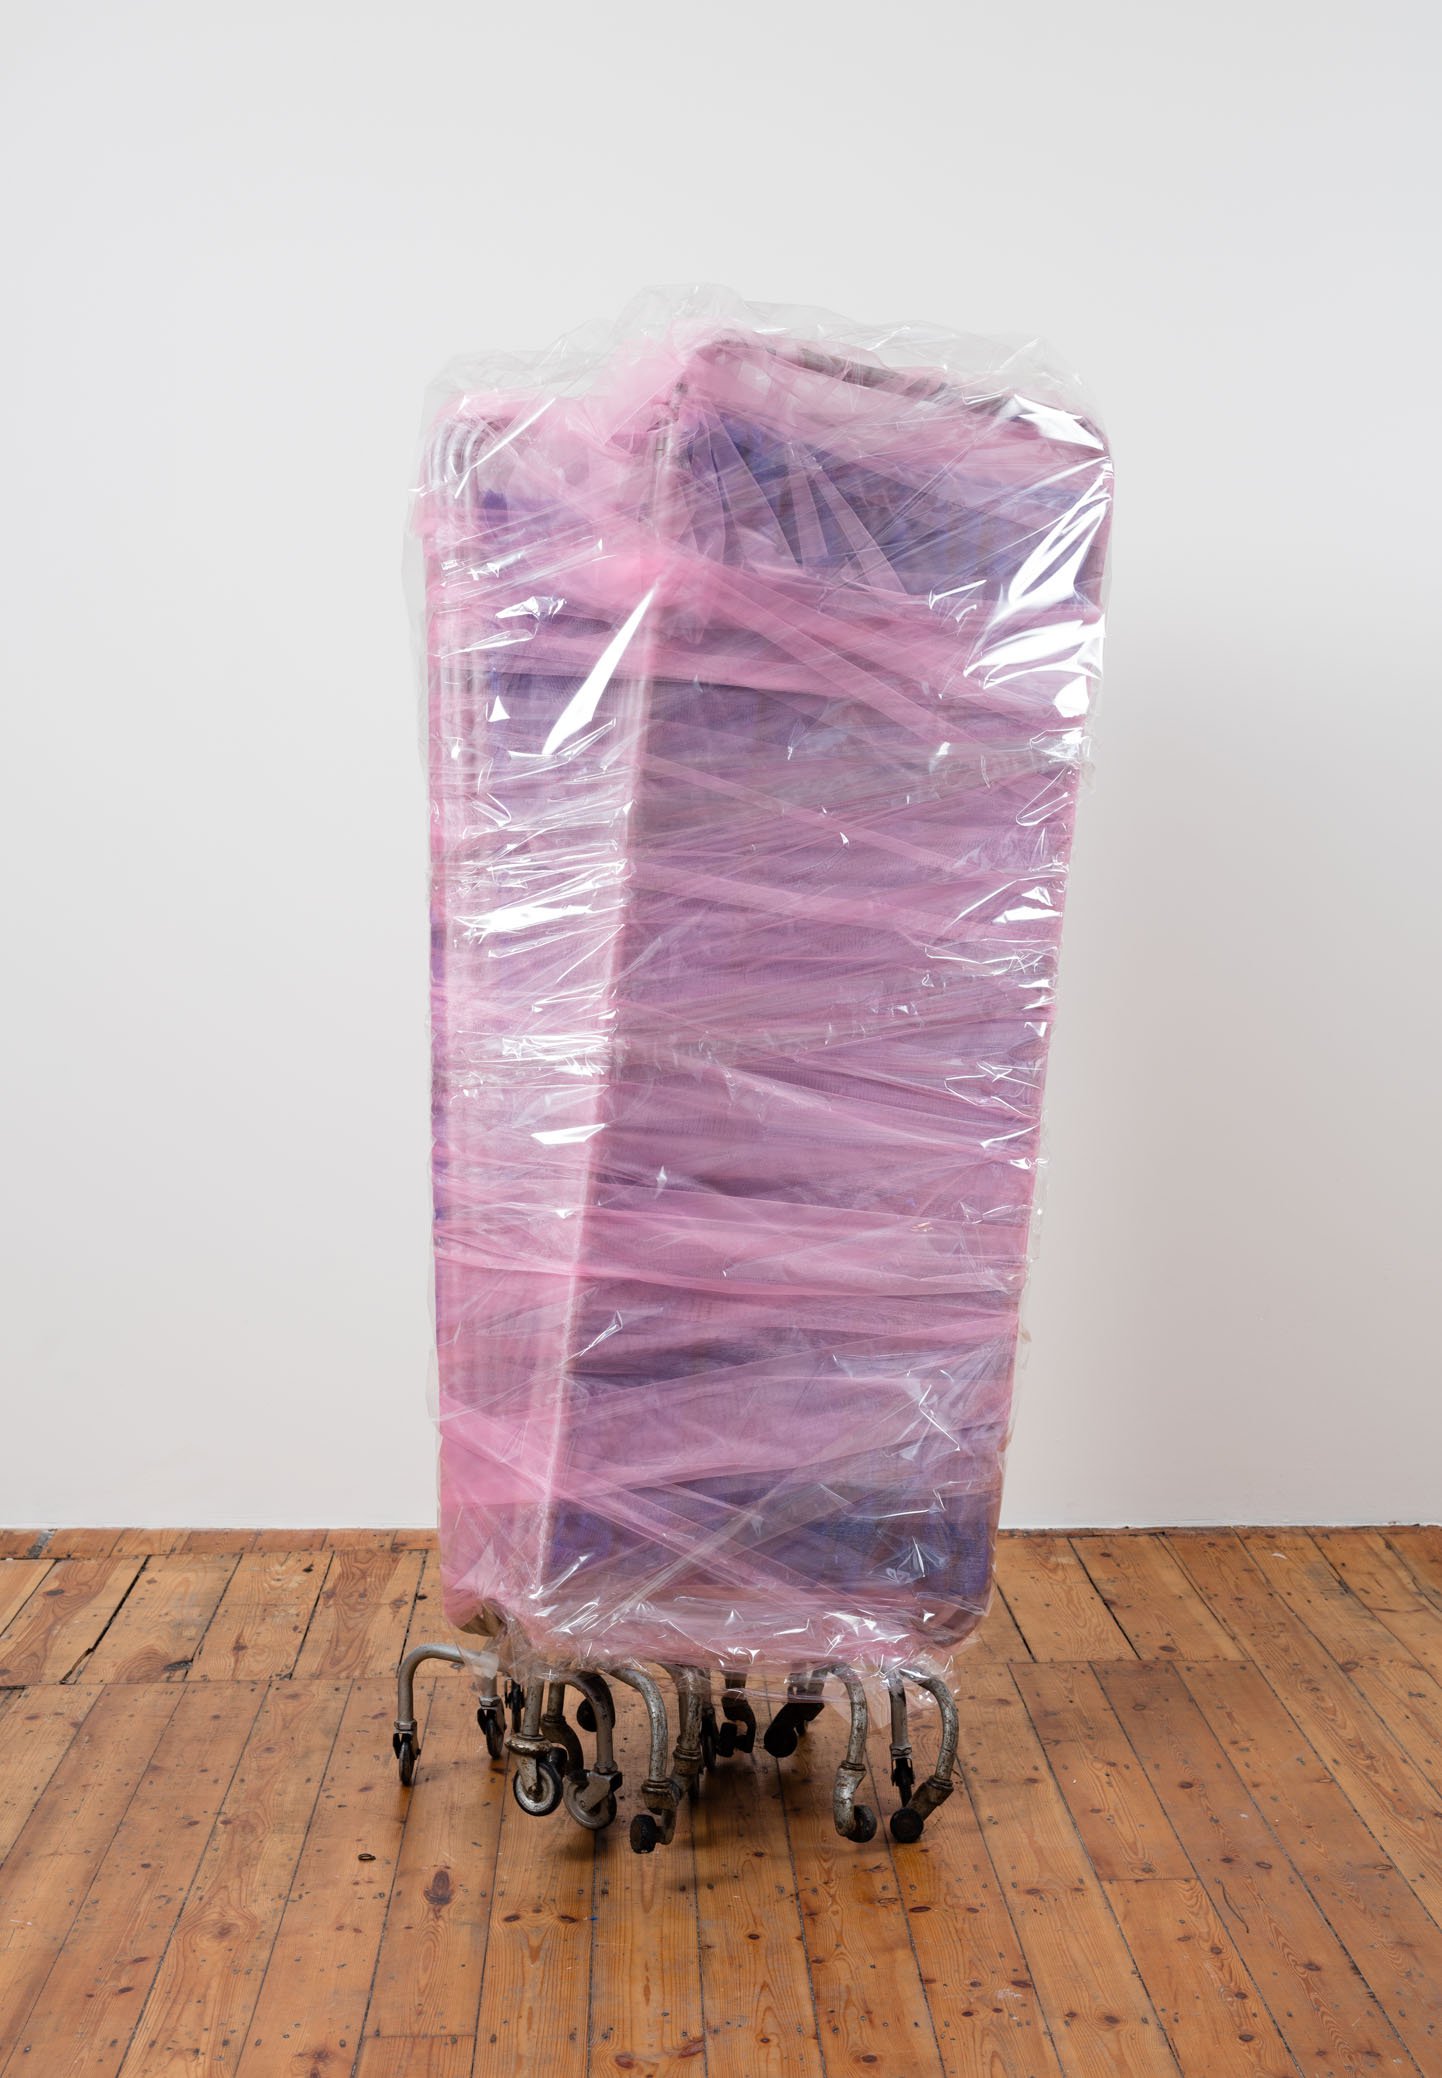 Ian Law, There was a body, I was there, was a body, medical privacy screens with soft toy fur fabric, curtain netting and organza, gift wrapped, 172 x 86 x 47 cm (67 3/4 x 33 7/8 x 18 1/2 in), 2016